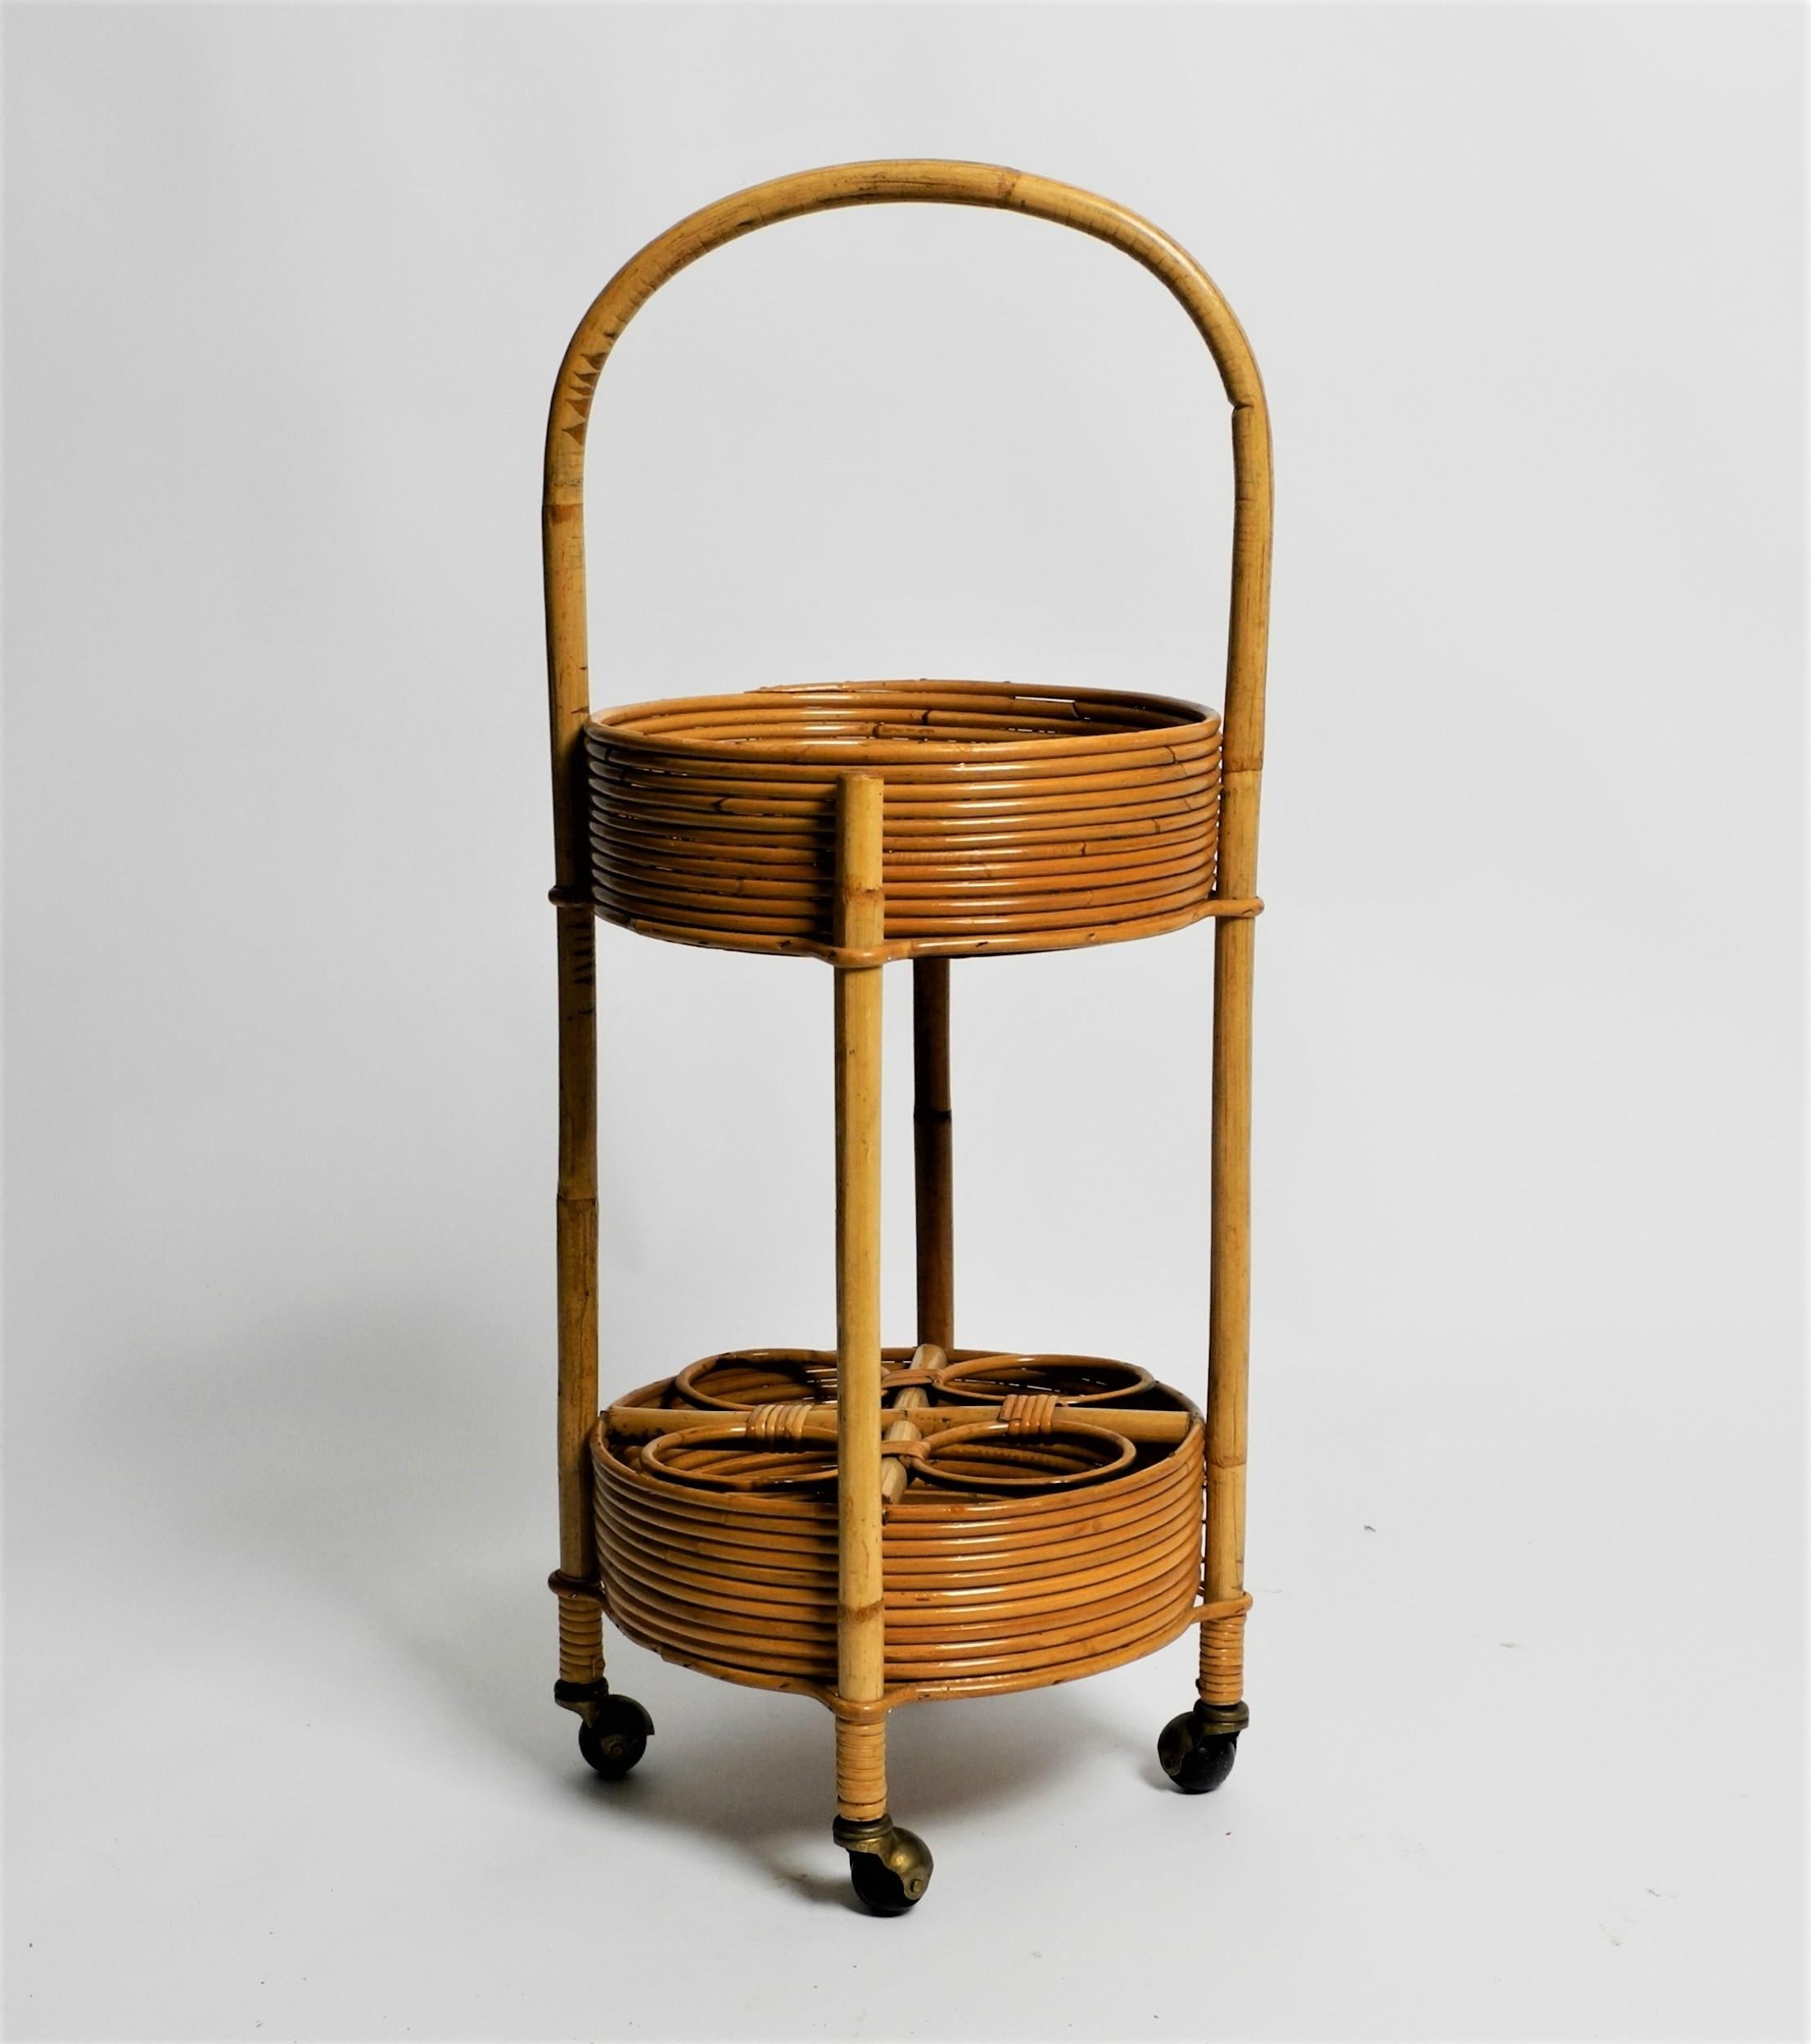 Vintage round rattan bar cart/serving trolley/rolling table on metal wheels with bottle holder, Italy, 70s.

Beautiful and practical small 1970s bar trolley with 2 trays. The bottom tray with 4 bottle holders. With a practical rounded carrying